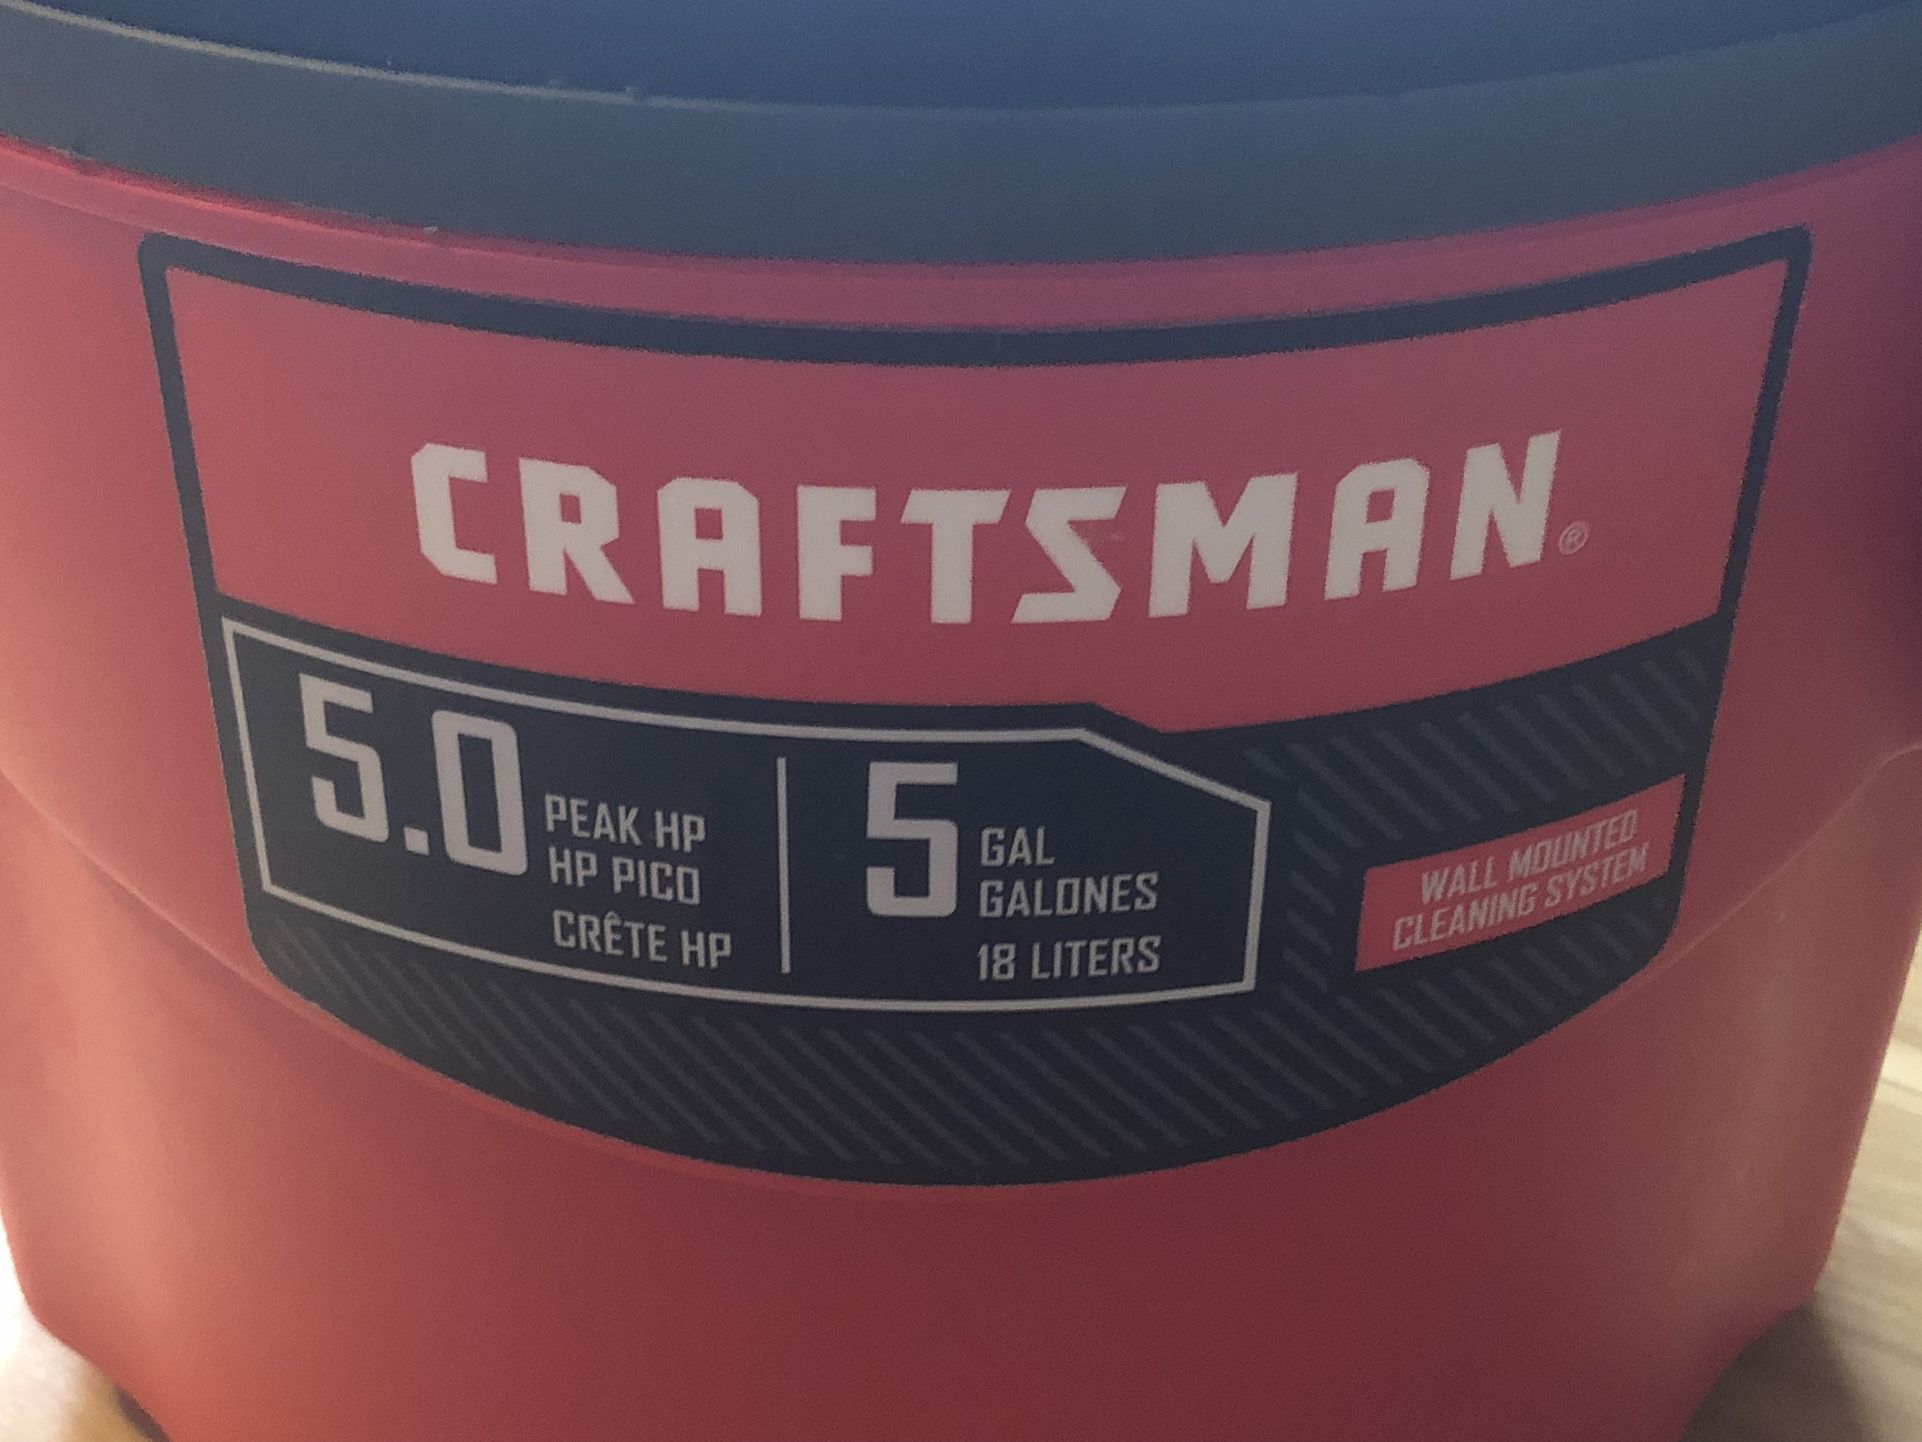 Craftsman 5 gal Corded Wet/Dry Vacuum 5 amps 120 V 5 HP